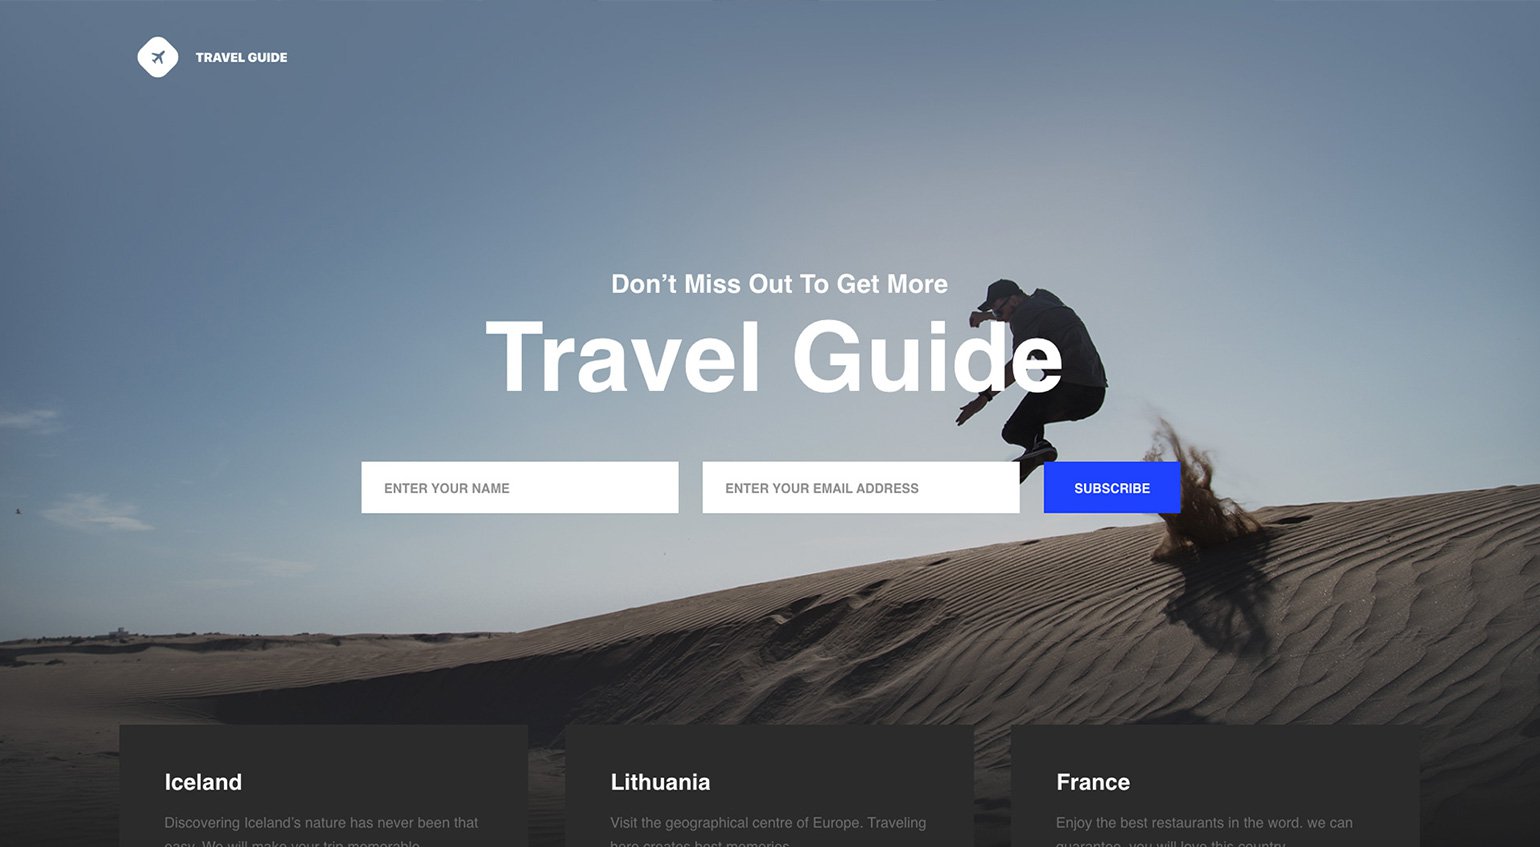 Landing page example for a travel guide